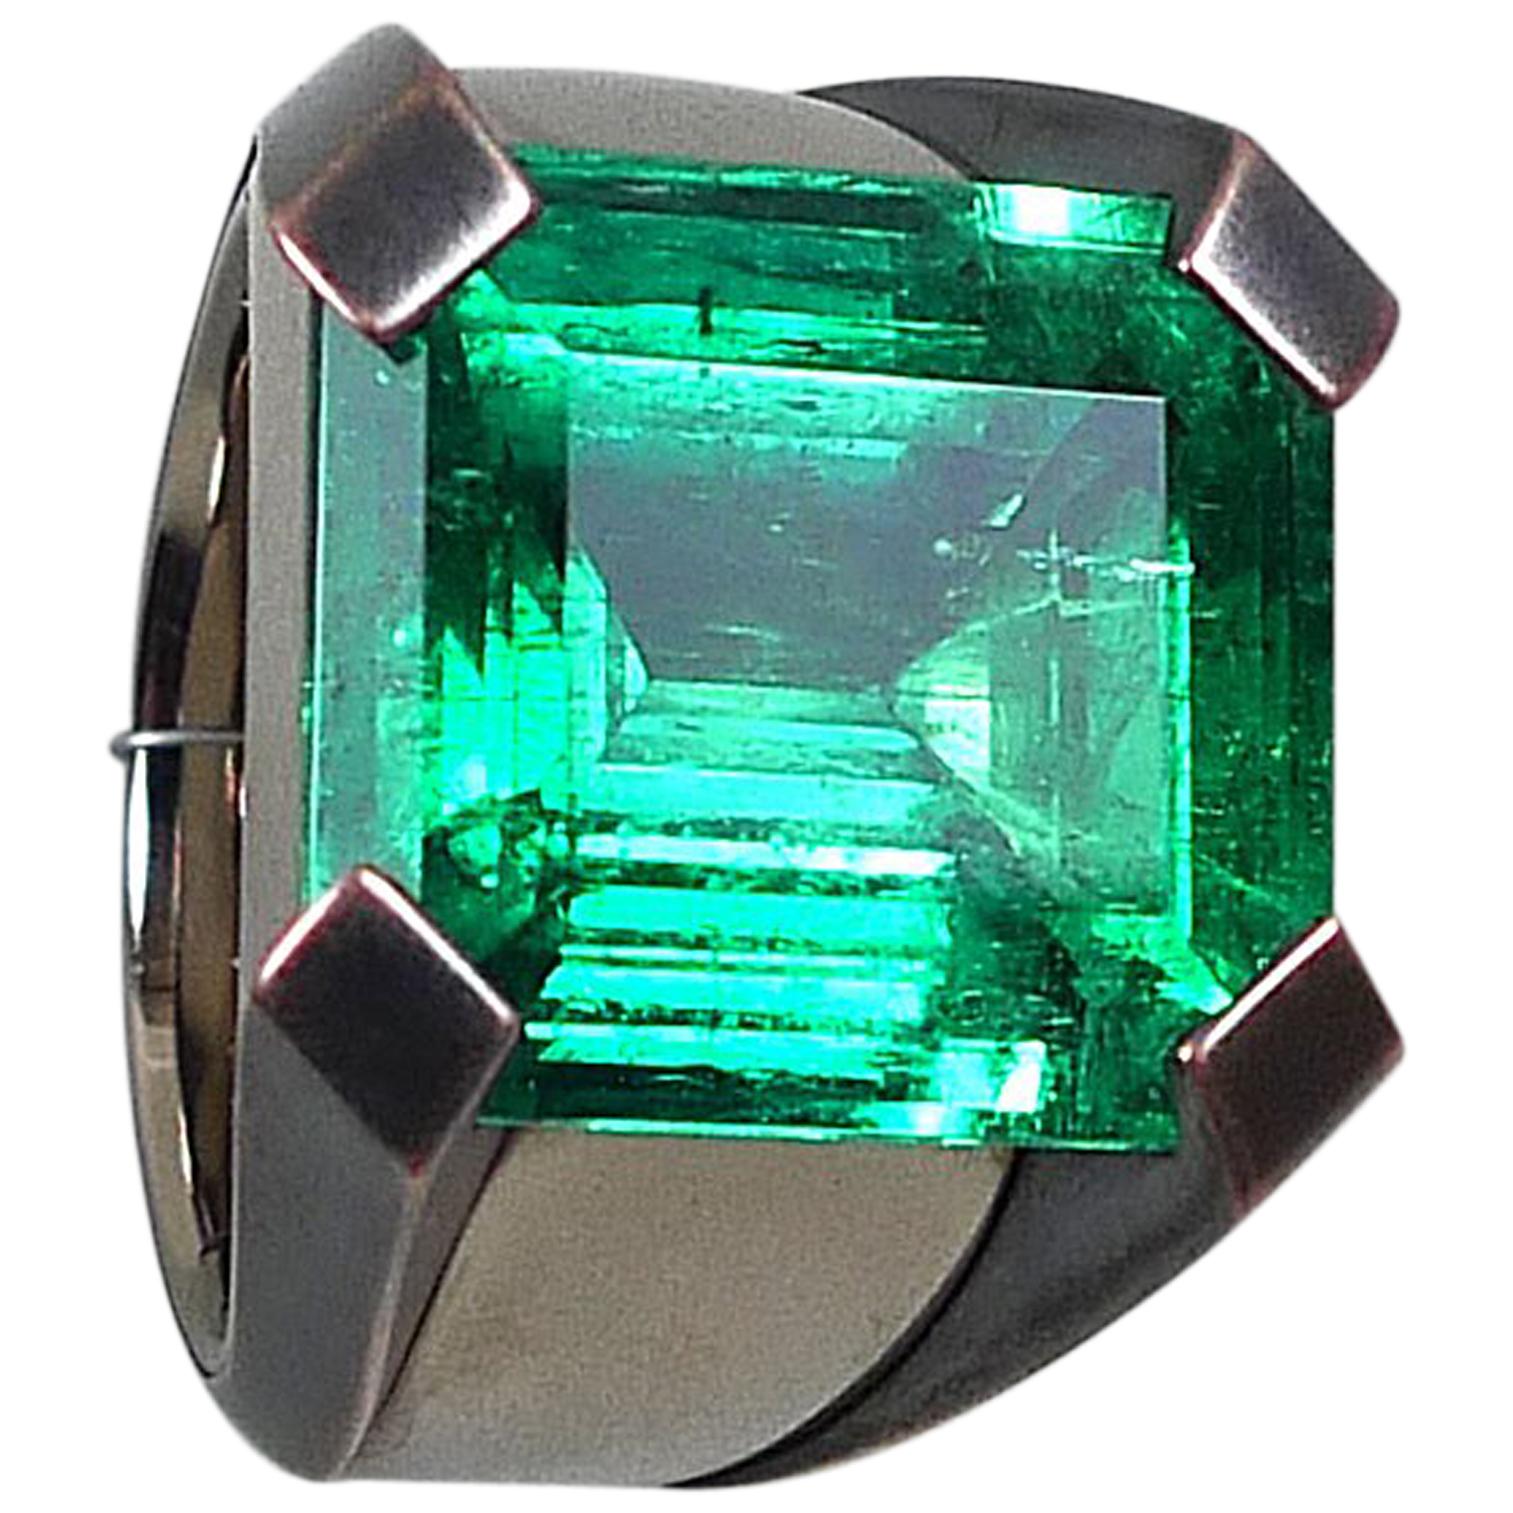 POWER SUPPLY is my name. Stunning designed extraordinary Colombian emerald ring, handcrafted in solid 18 karat white gold with powerful bronze prongs. Showcasing a top of his class quality perfect cutted natural Colombian emerald (coming from the